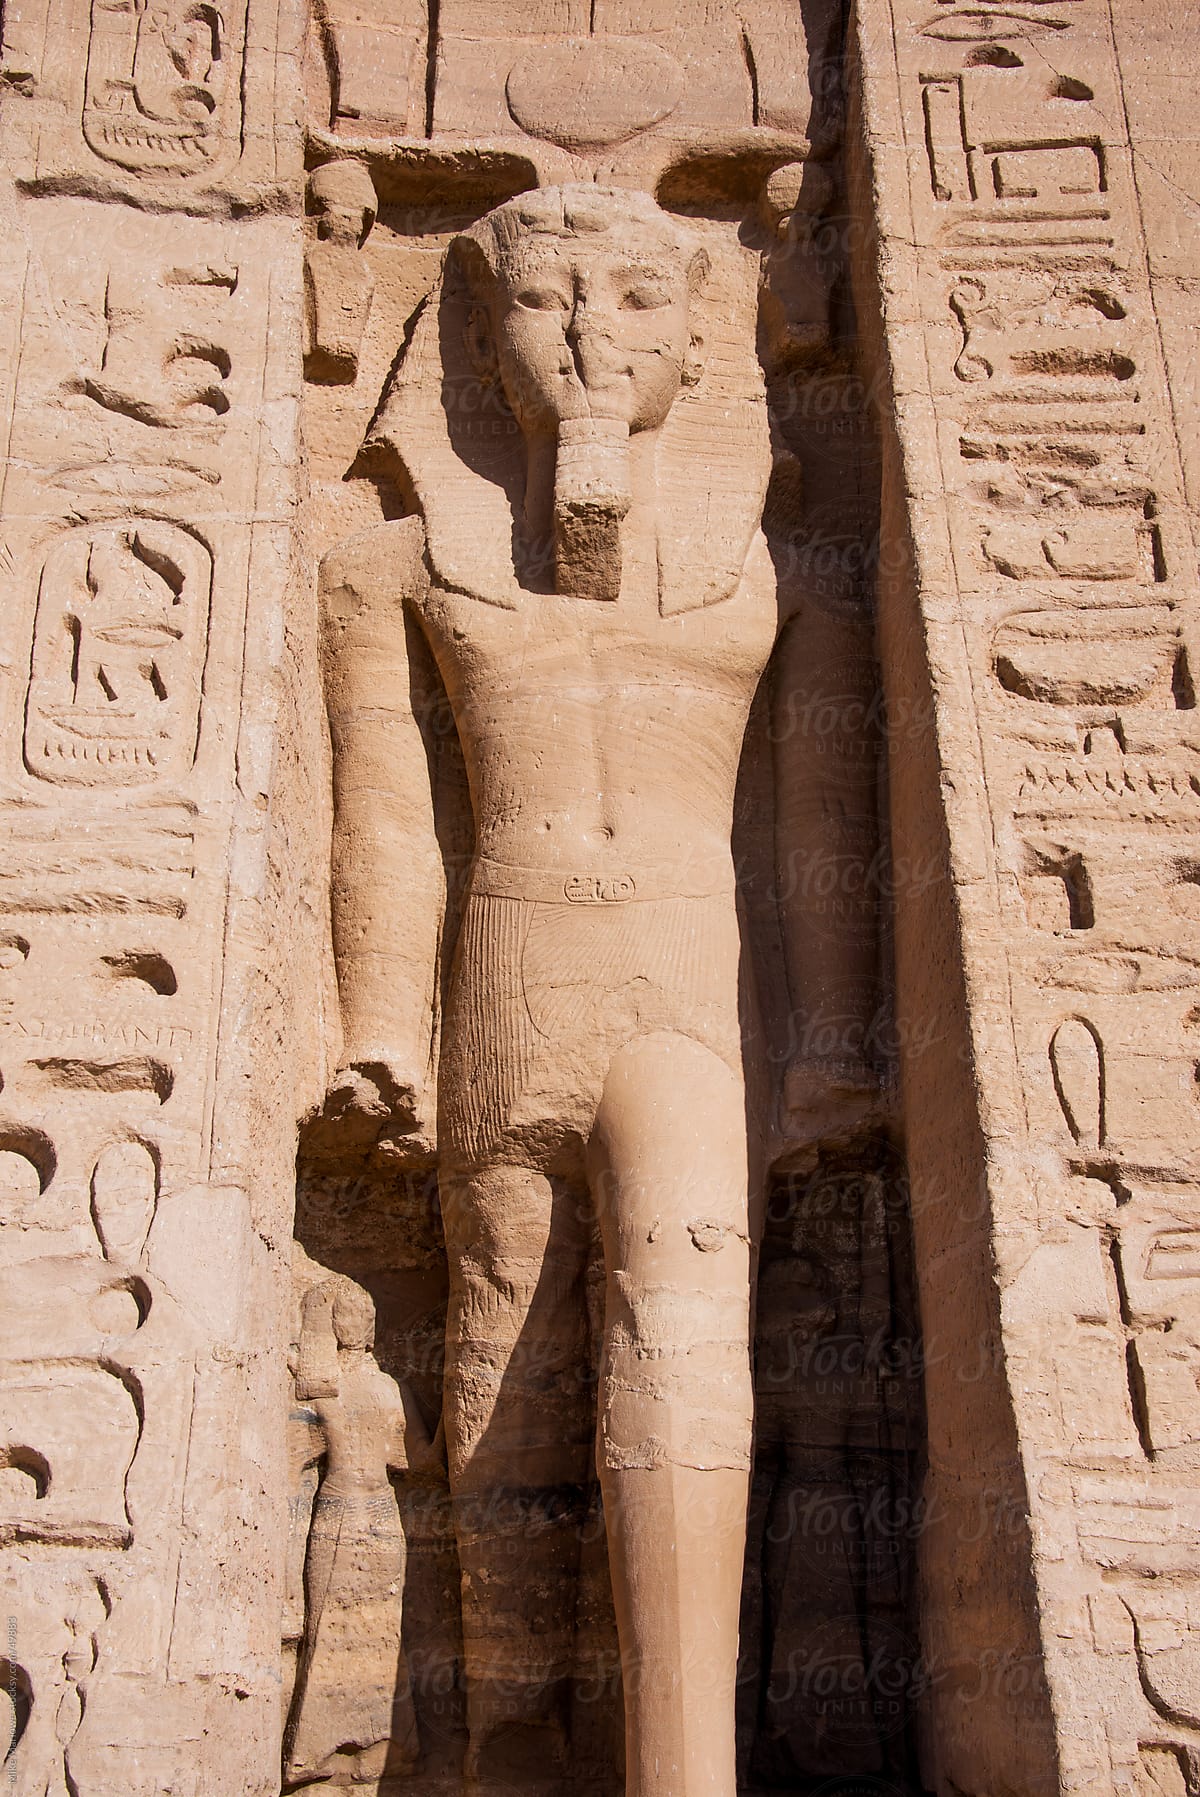 An ancient Egyptian stone carving depicting a human figure.